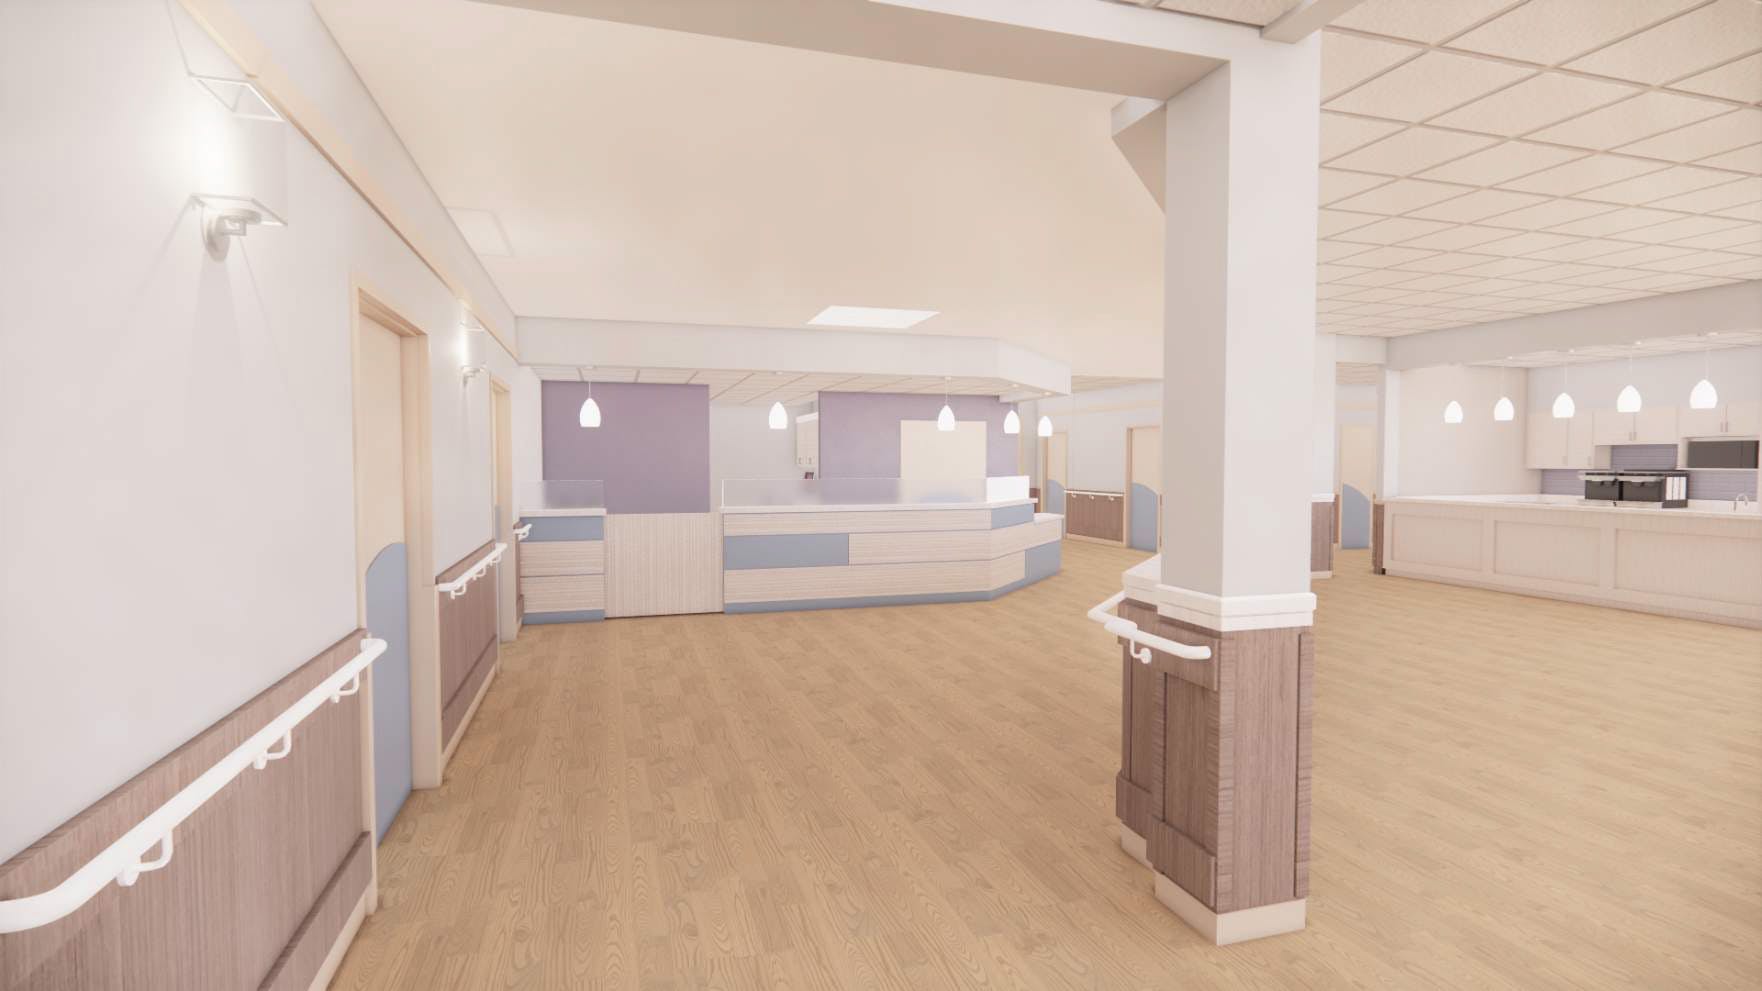 Rendering of the West nurse station